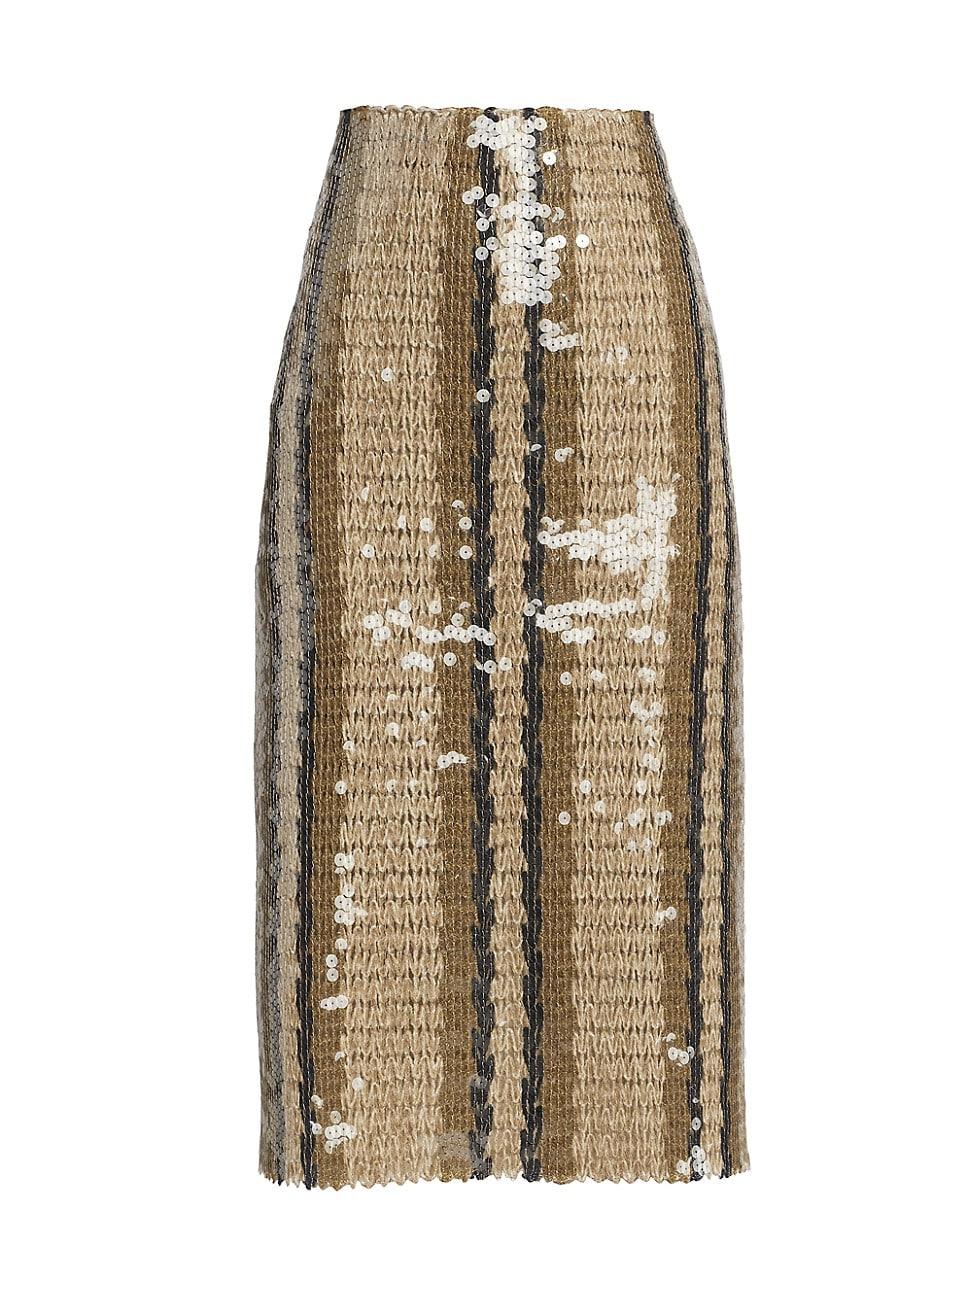 Brunello Cucinelli Striped Sequined Midi-skirt in Natural | Lyst